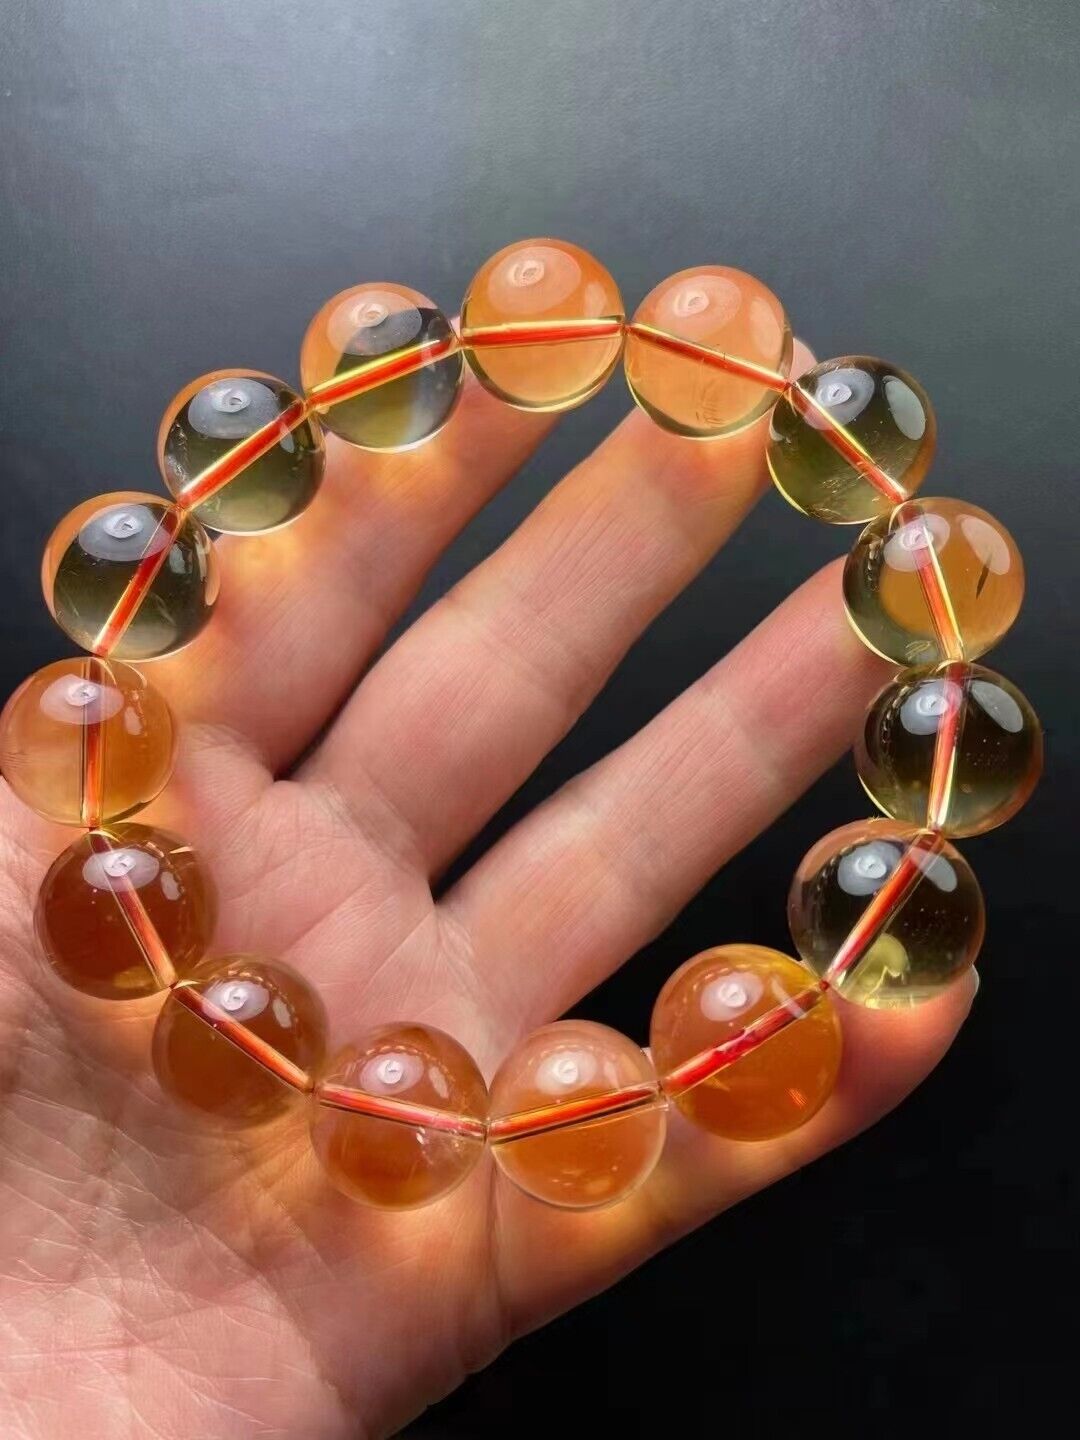 15mm Natural Citrine Quartz Yellow Crystal Round Bead Stretch Bracelet A AAAA